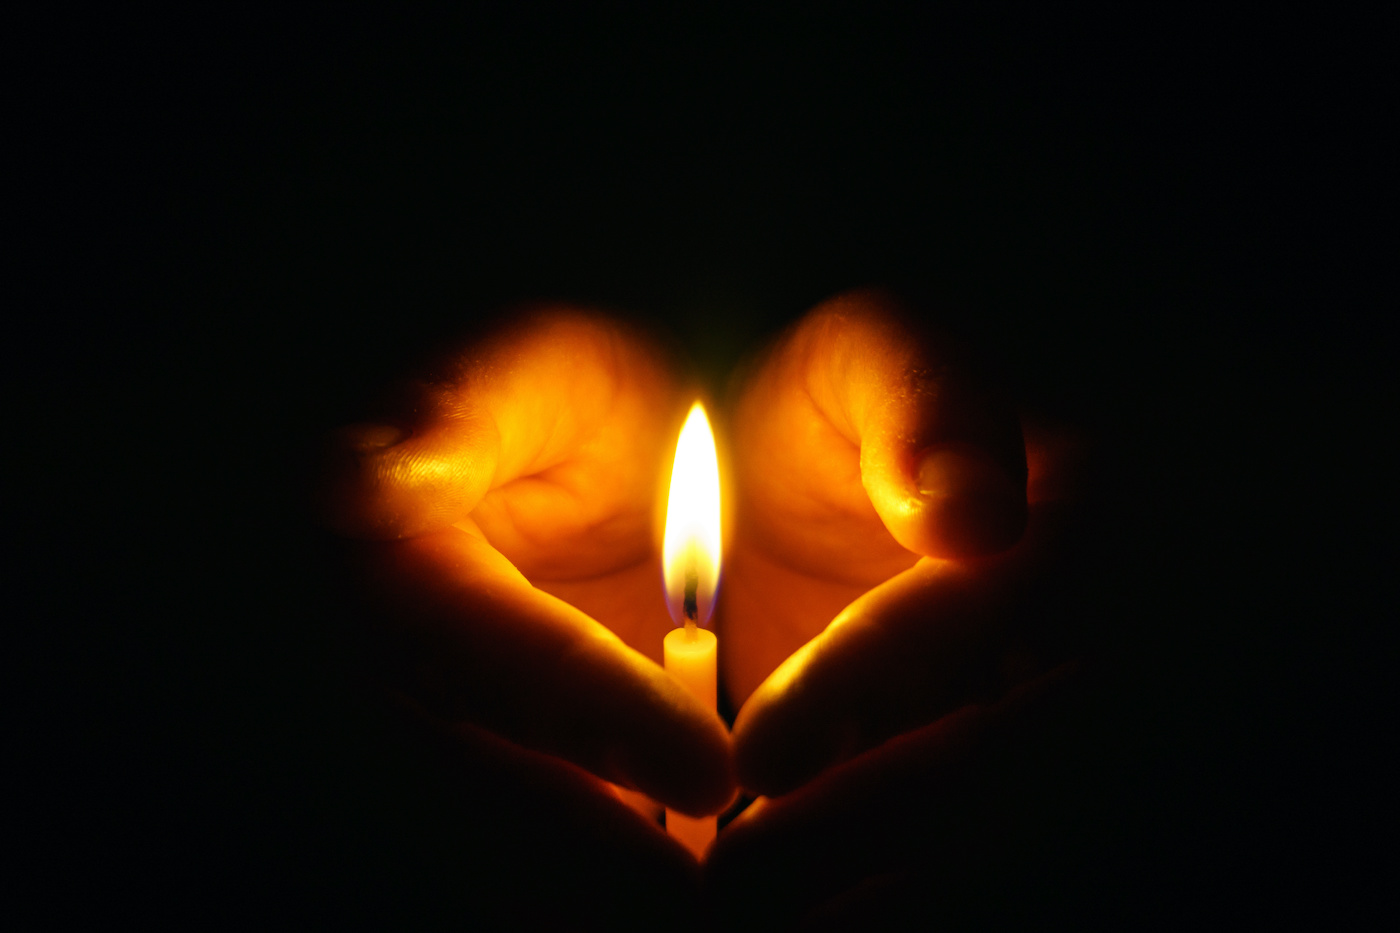 Holding a Candle in the RareDisease DIAGNOSIS Darkness Rare Mamas by